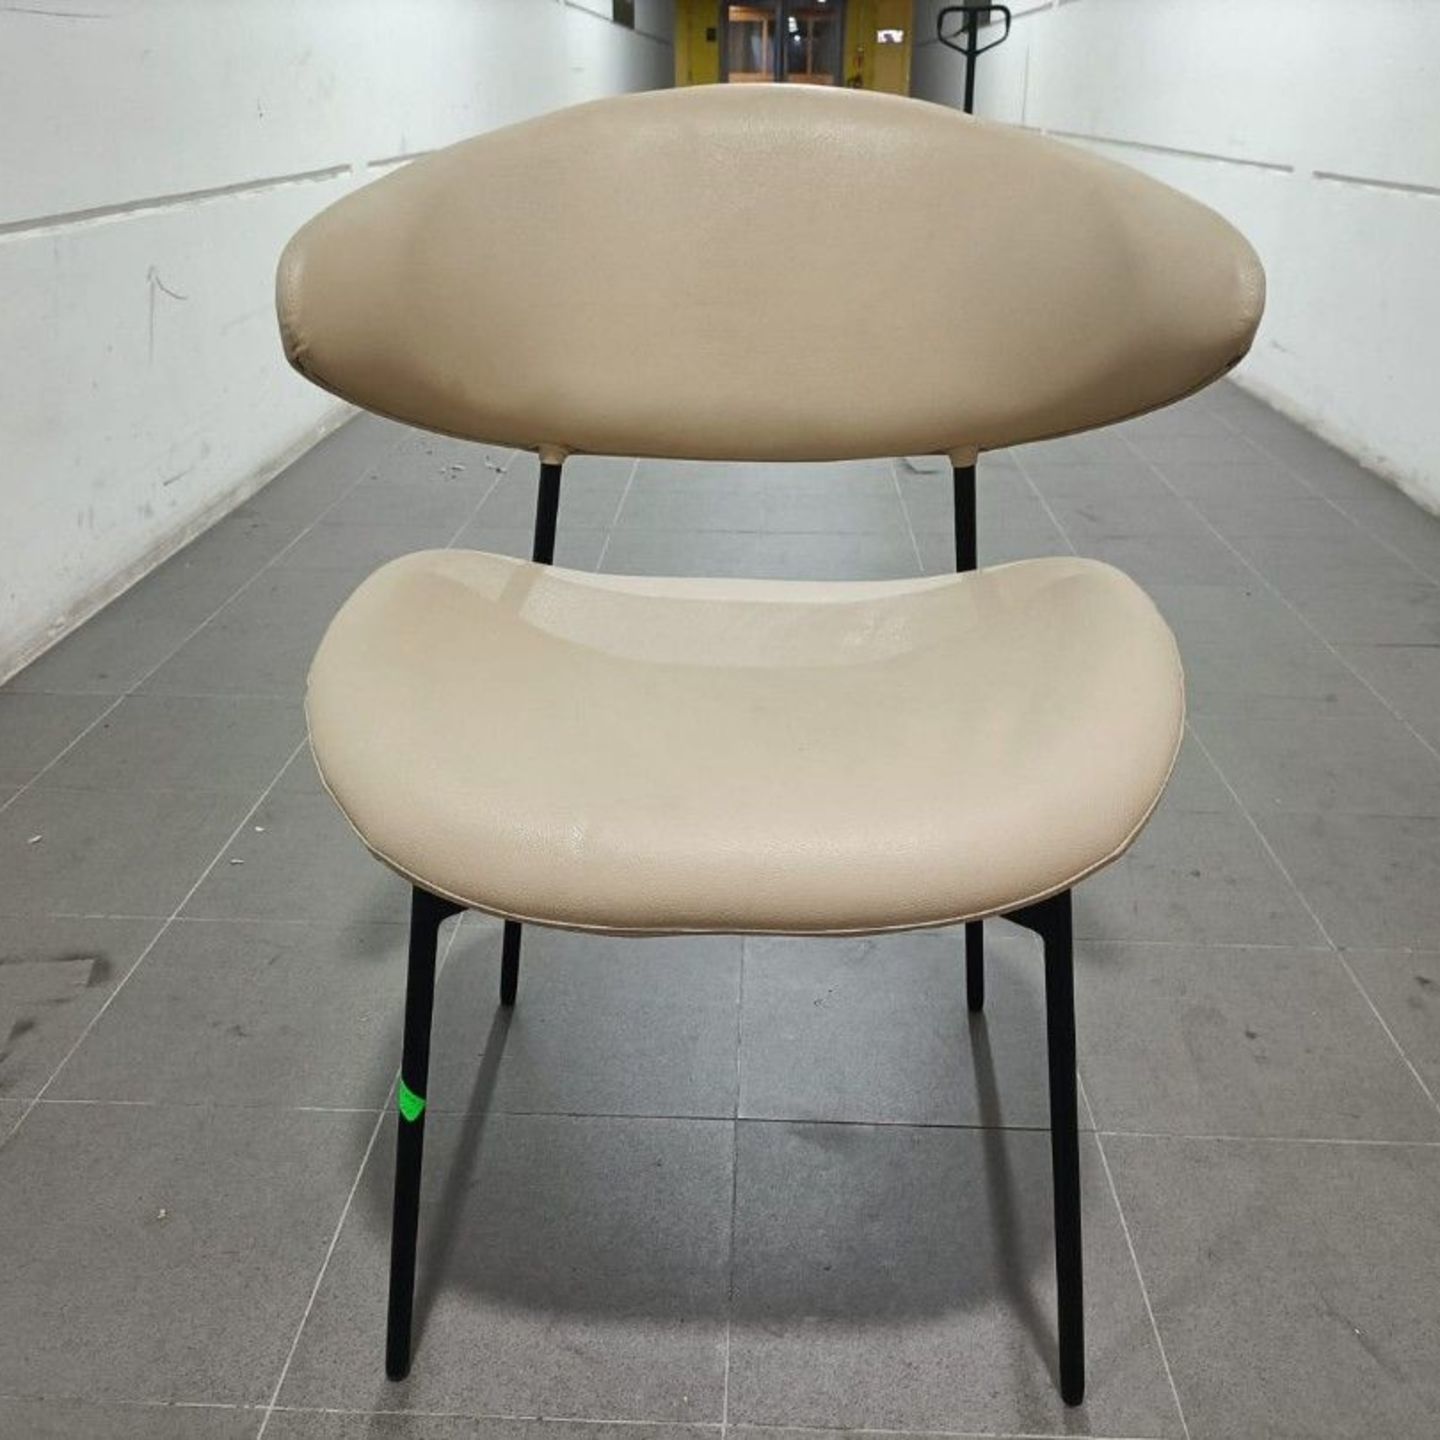 RINAR Chair (one piece only)